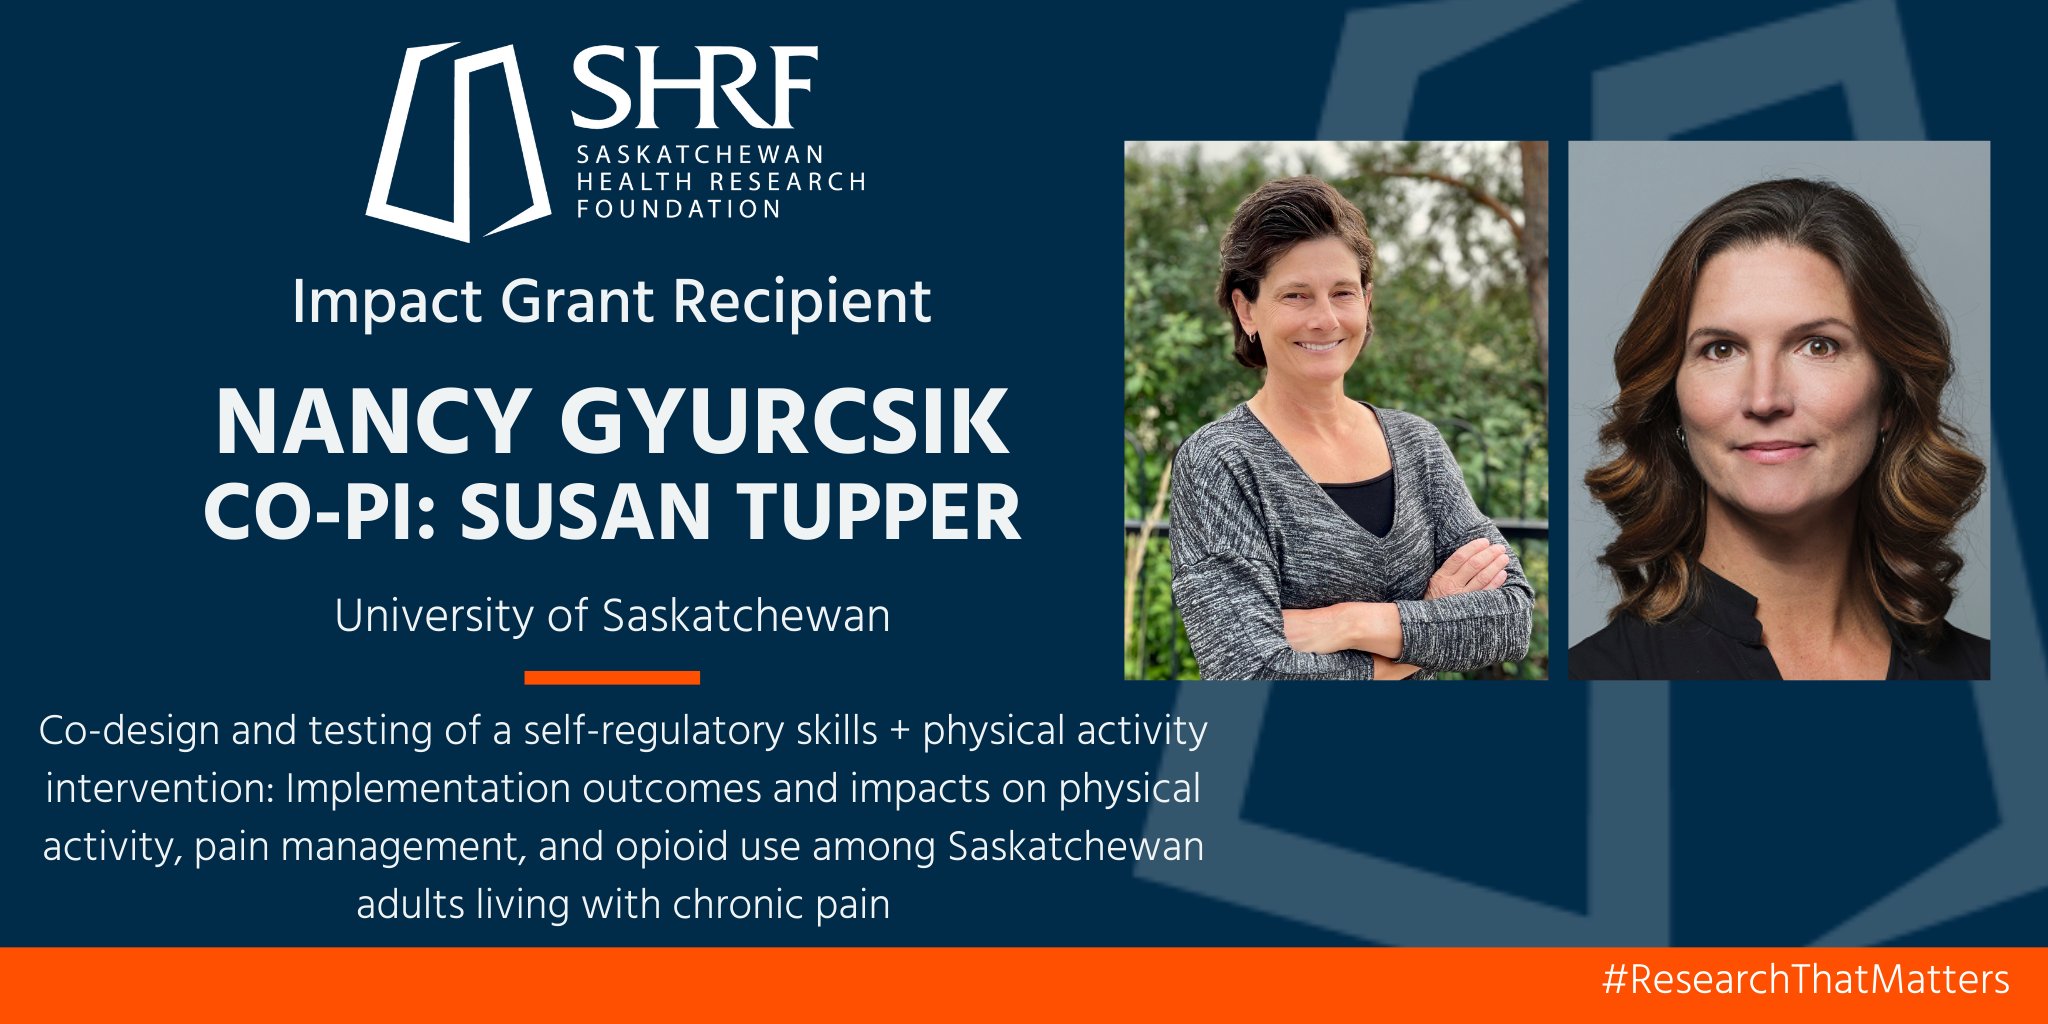 Shrf With Support Of New Solutionssk Funding Usaskkin Nancy Gyurcsik Susan Tupper Testing Effectiveness Of Exercise Program In Helping Sk People With Chronic Pain Reduce Reliance On Avoid Misuse